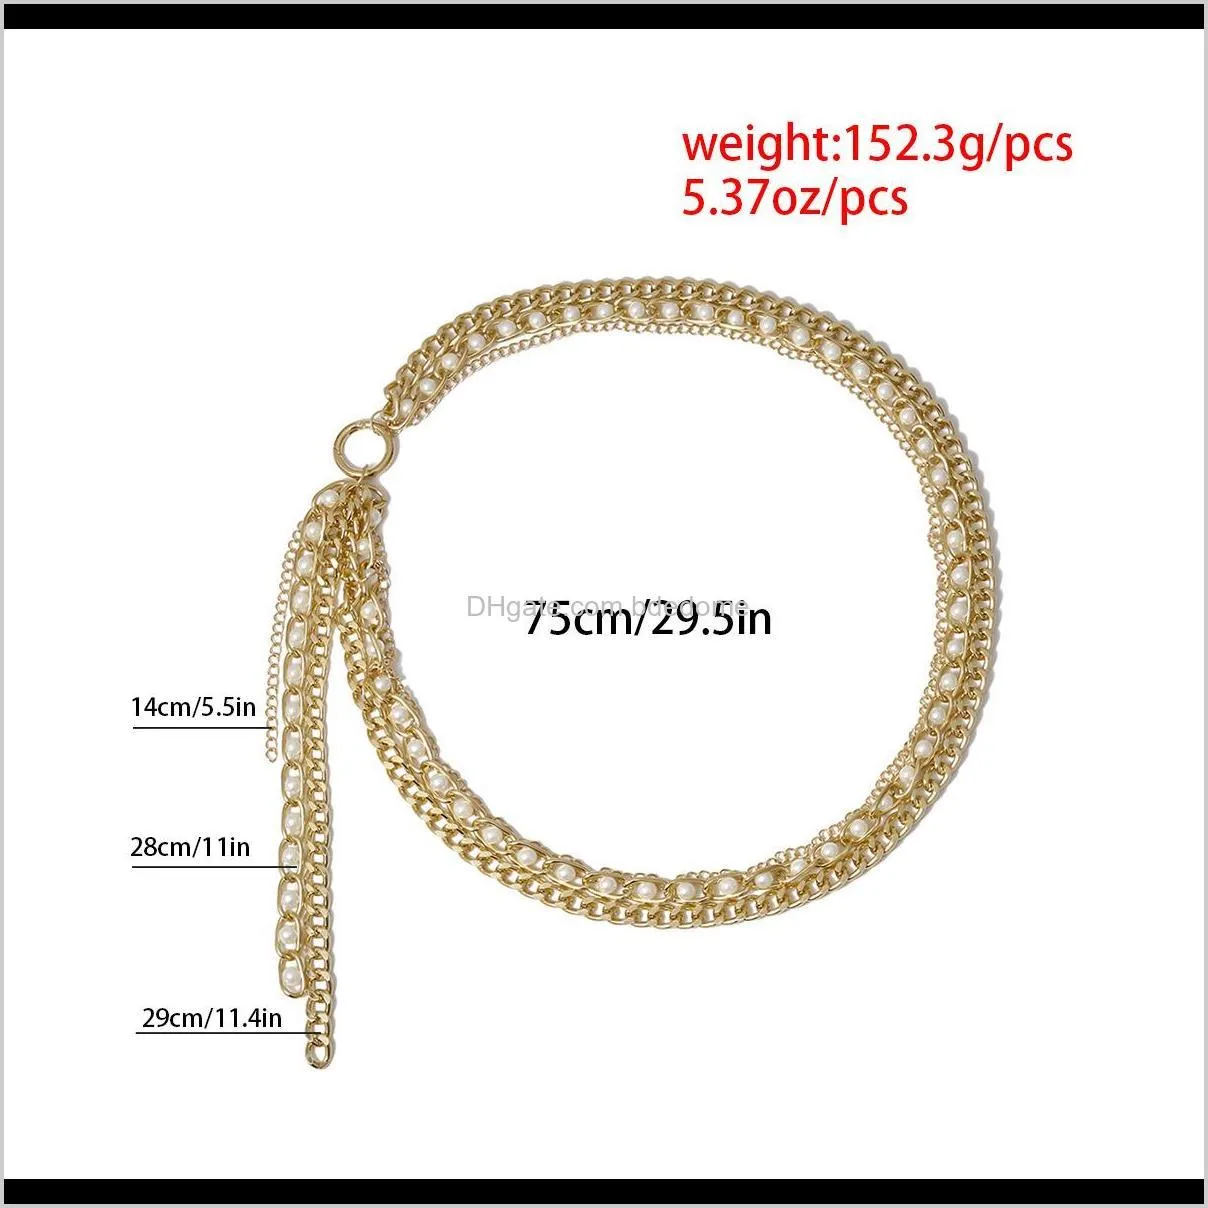 Vintage Multilayer Chunky Thick Cuba Pearl Body Chain for Women Punk Tassels Pendant Harness Waist Belly Chain Jewelry